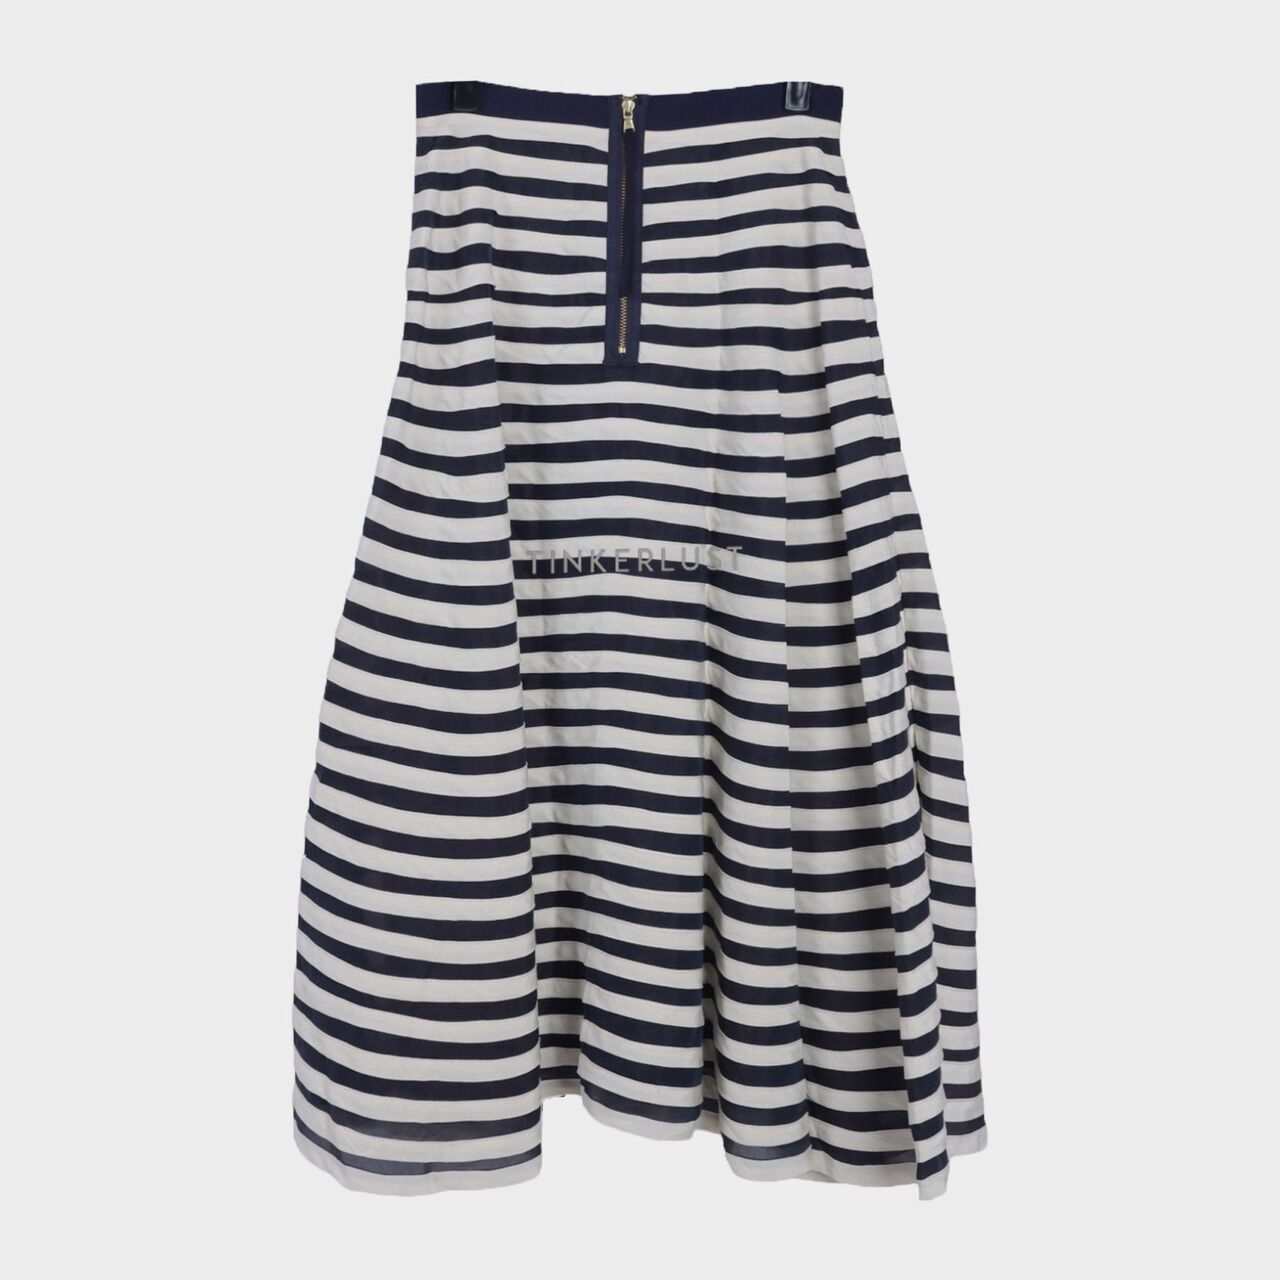 Marc by Marc Jacobs White/Navy Midi Skirt 